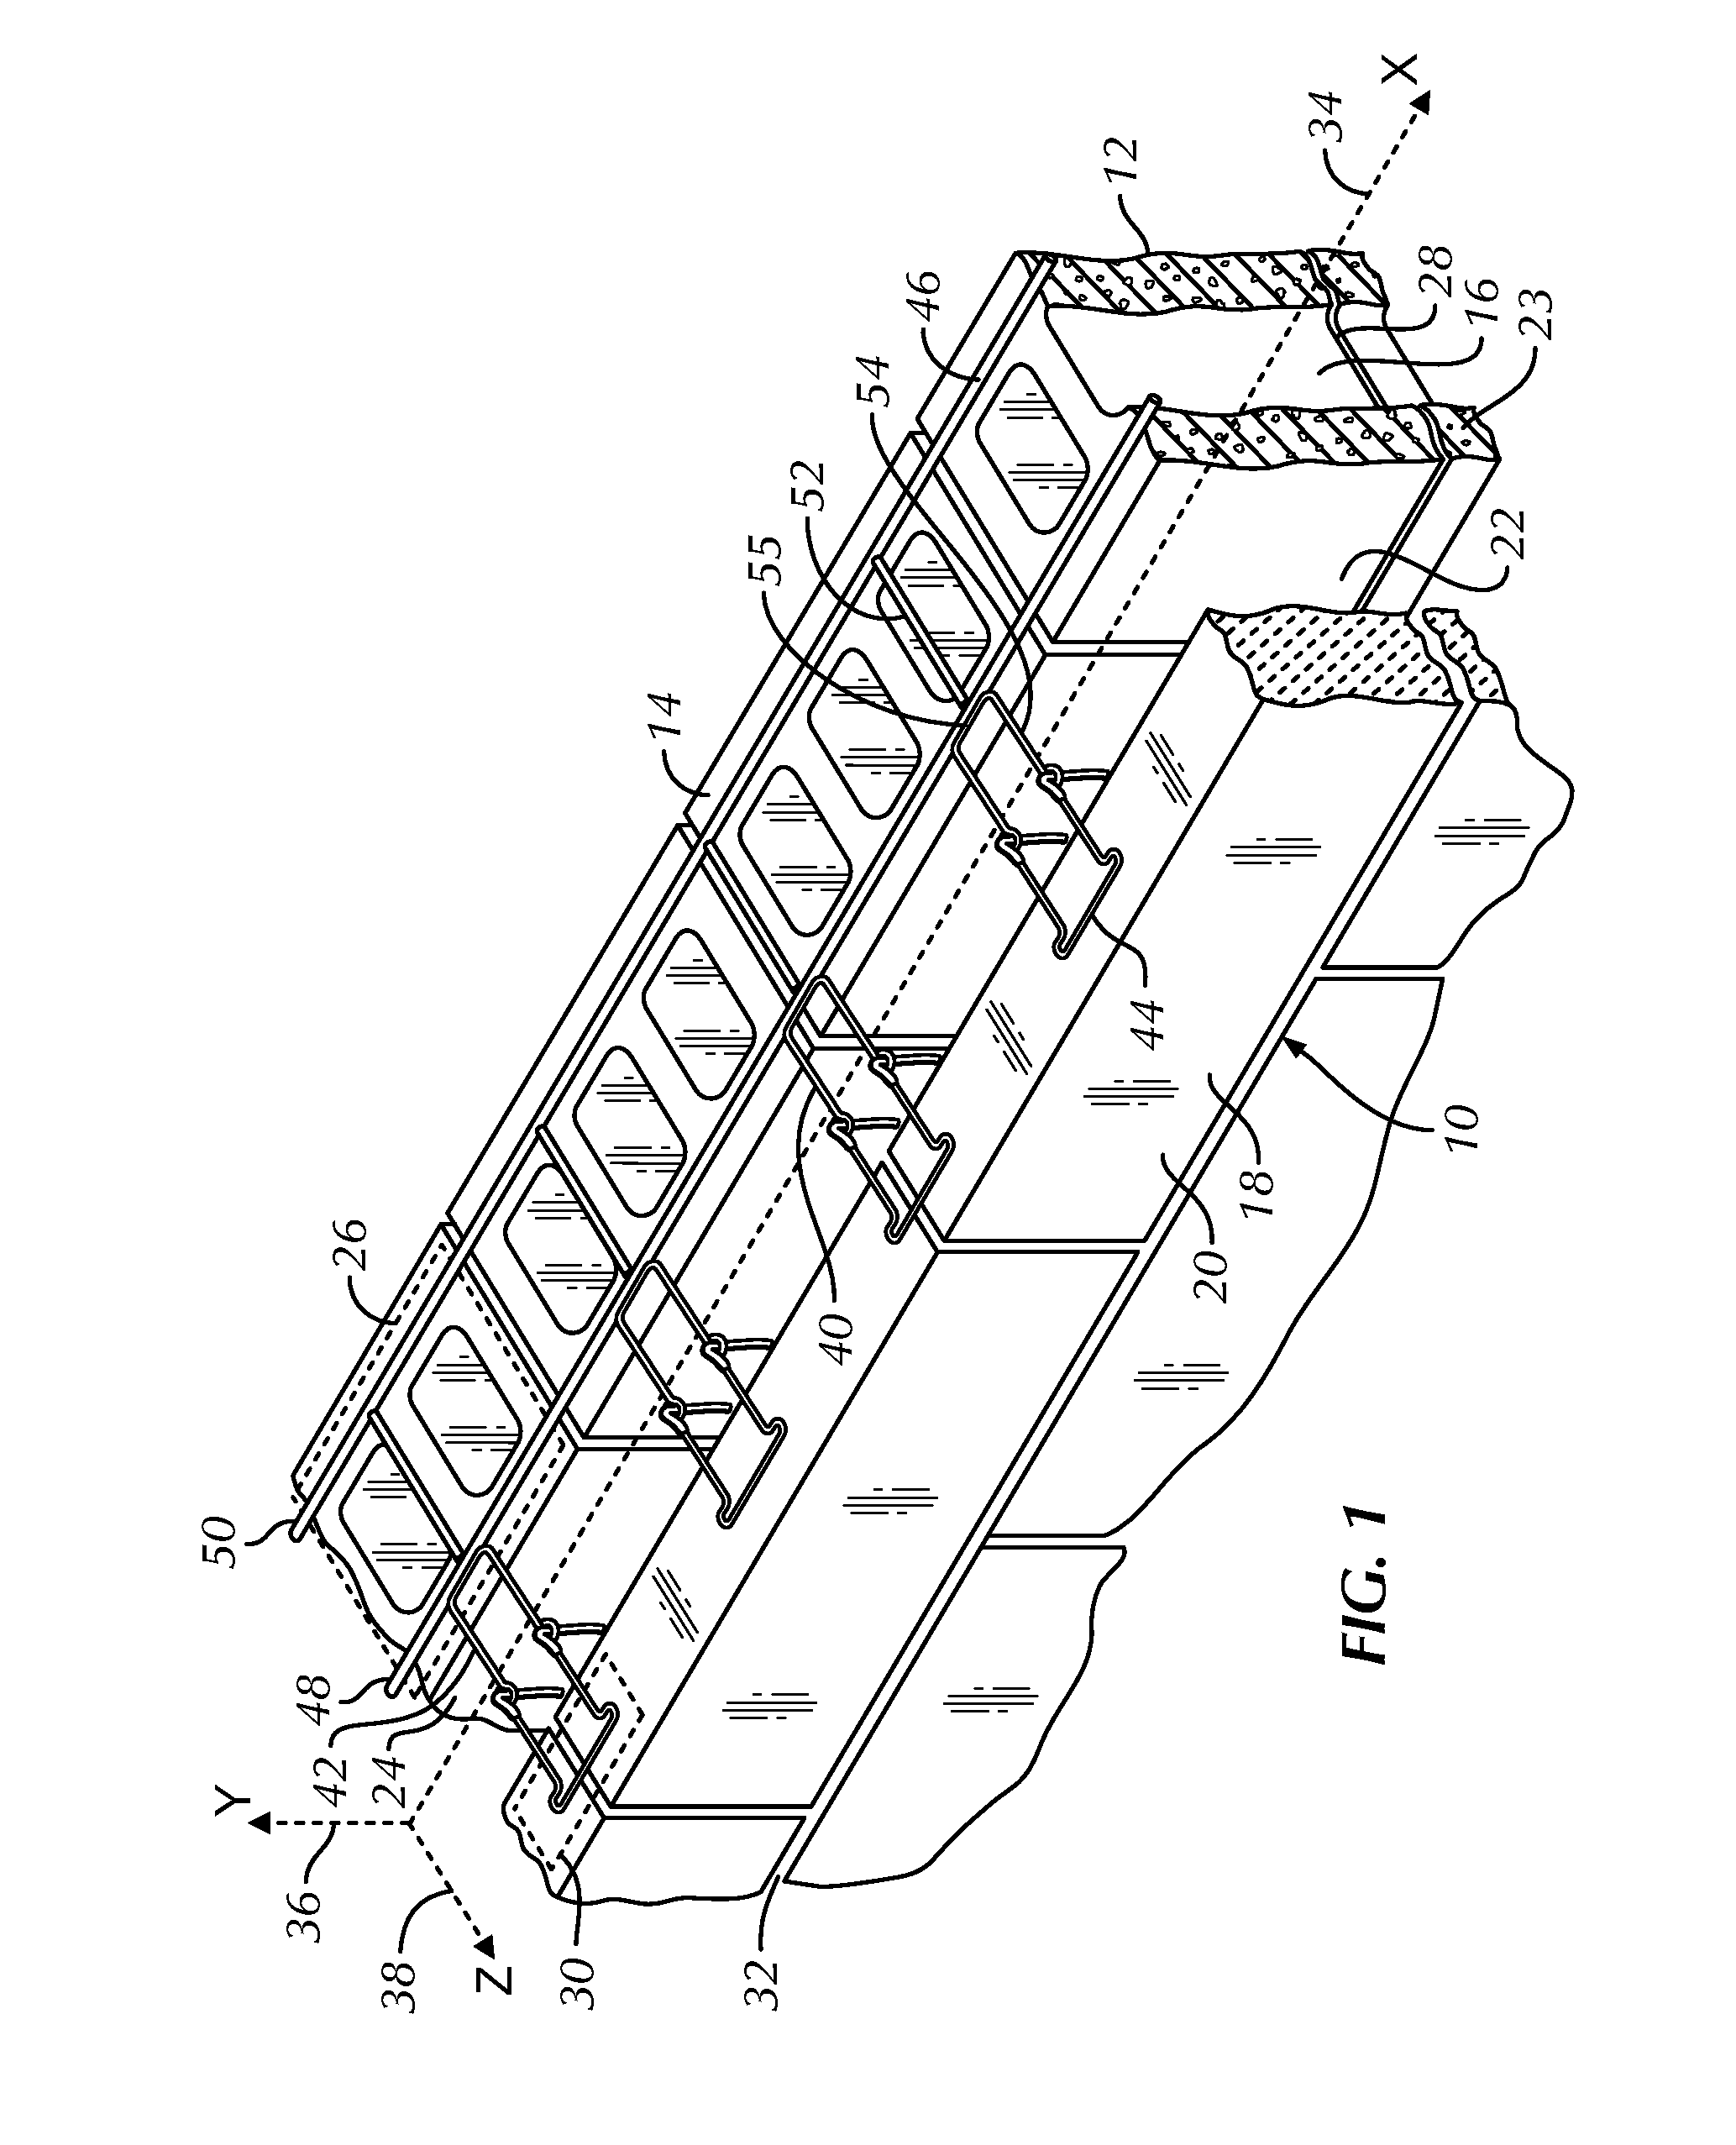 Dual pintle and anchoring system utilizing the same